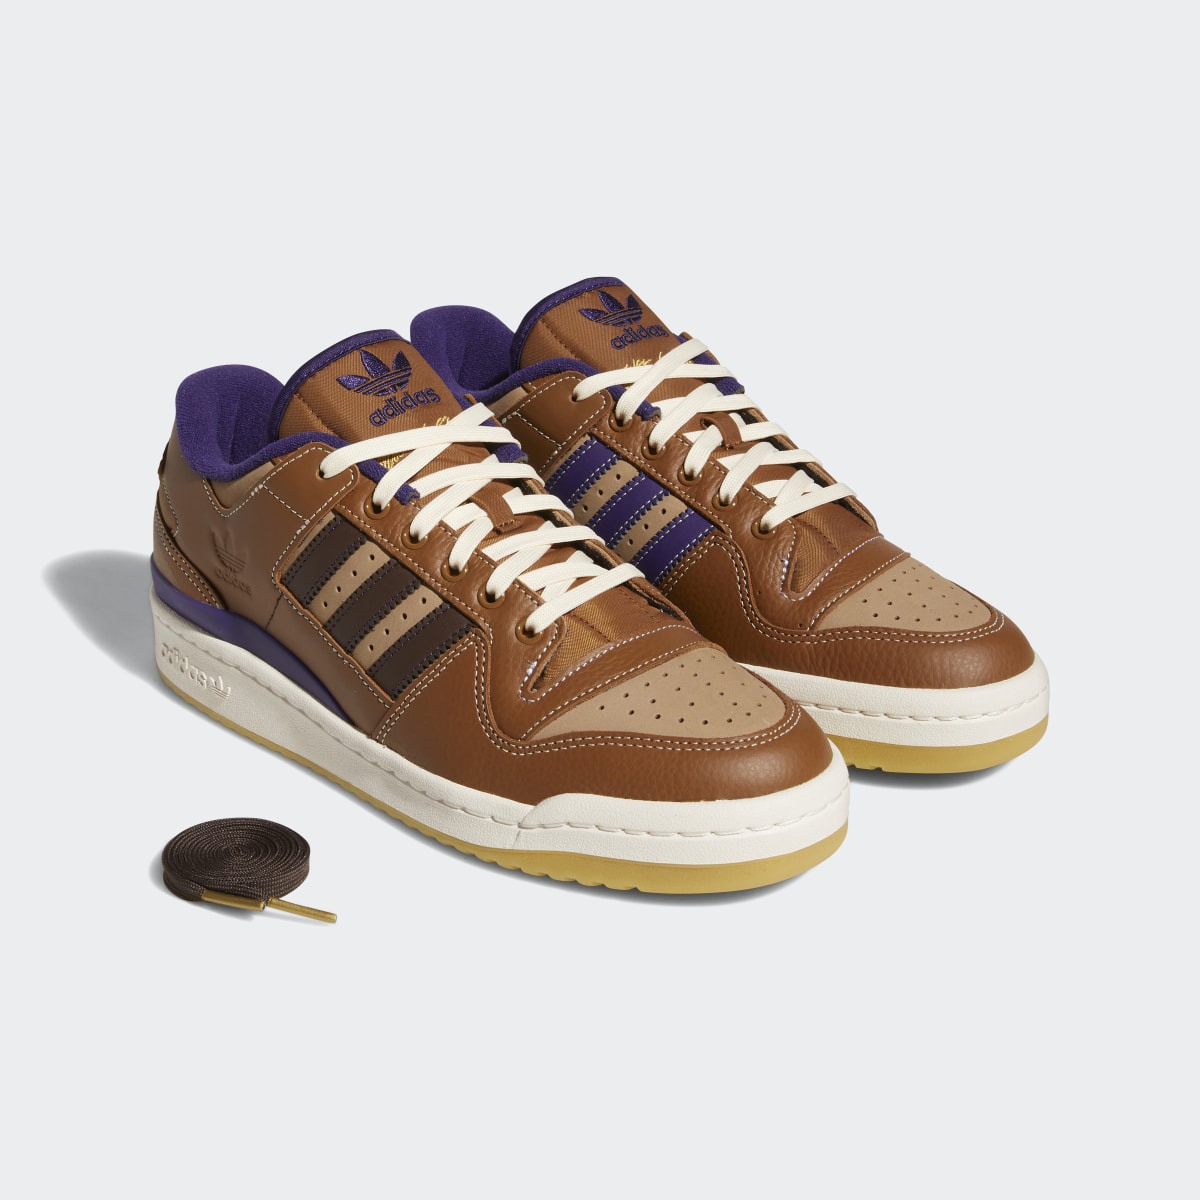 Adidas Heitor Forum 84 Low ADV Shoes. 4